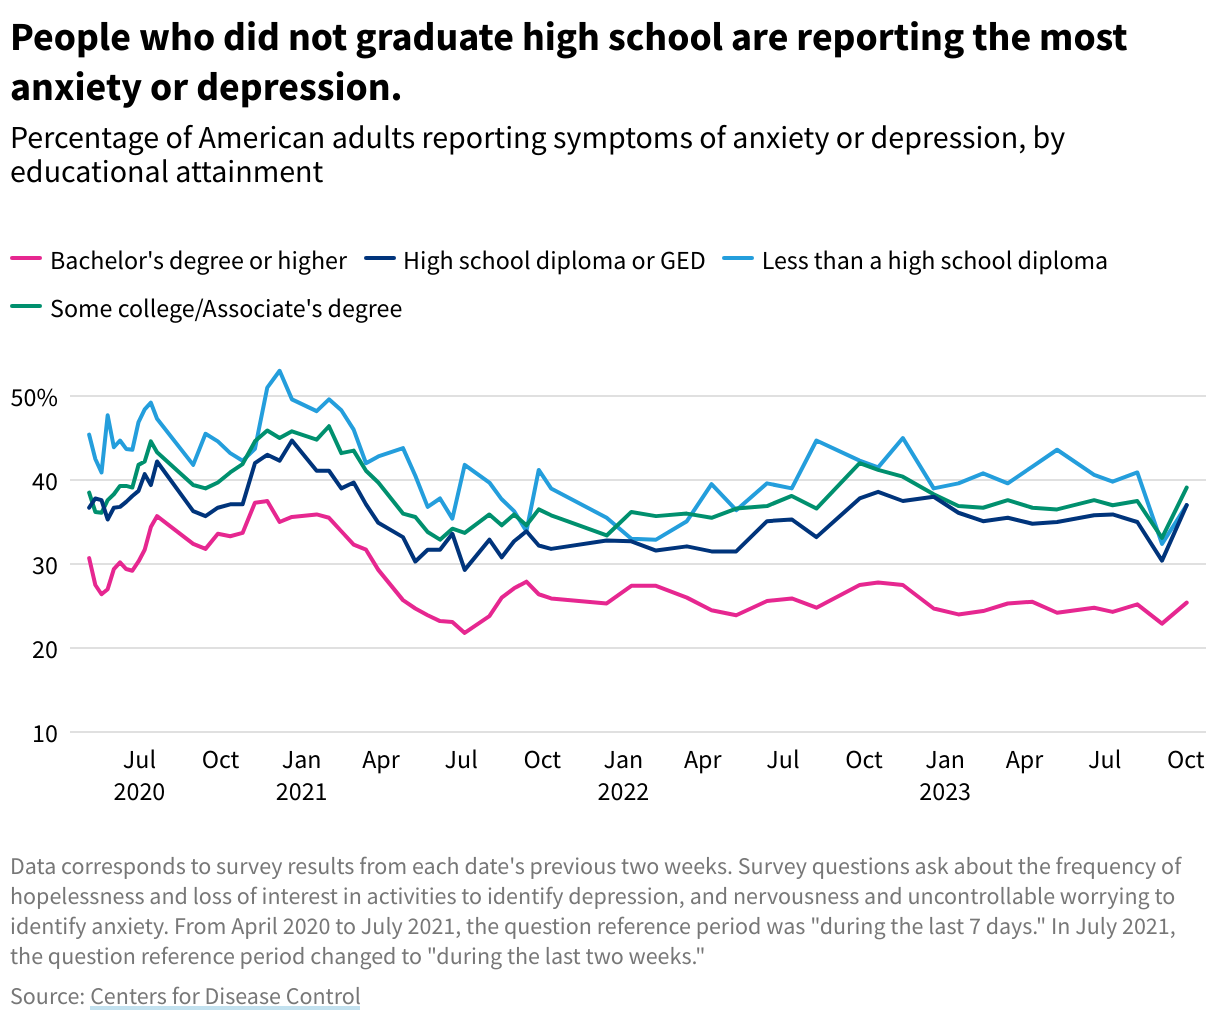 Line chart showing that people with less than a high school diploma had the highest rates of anxiety/depression, followed by those with some college, then a high school diploma, then a bachelor's.